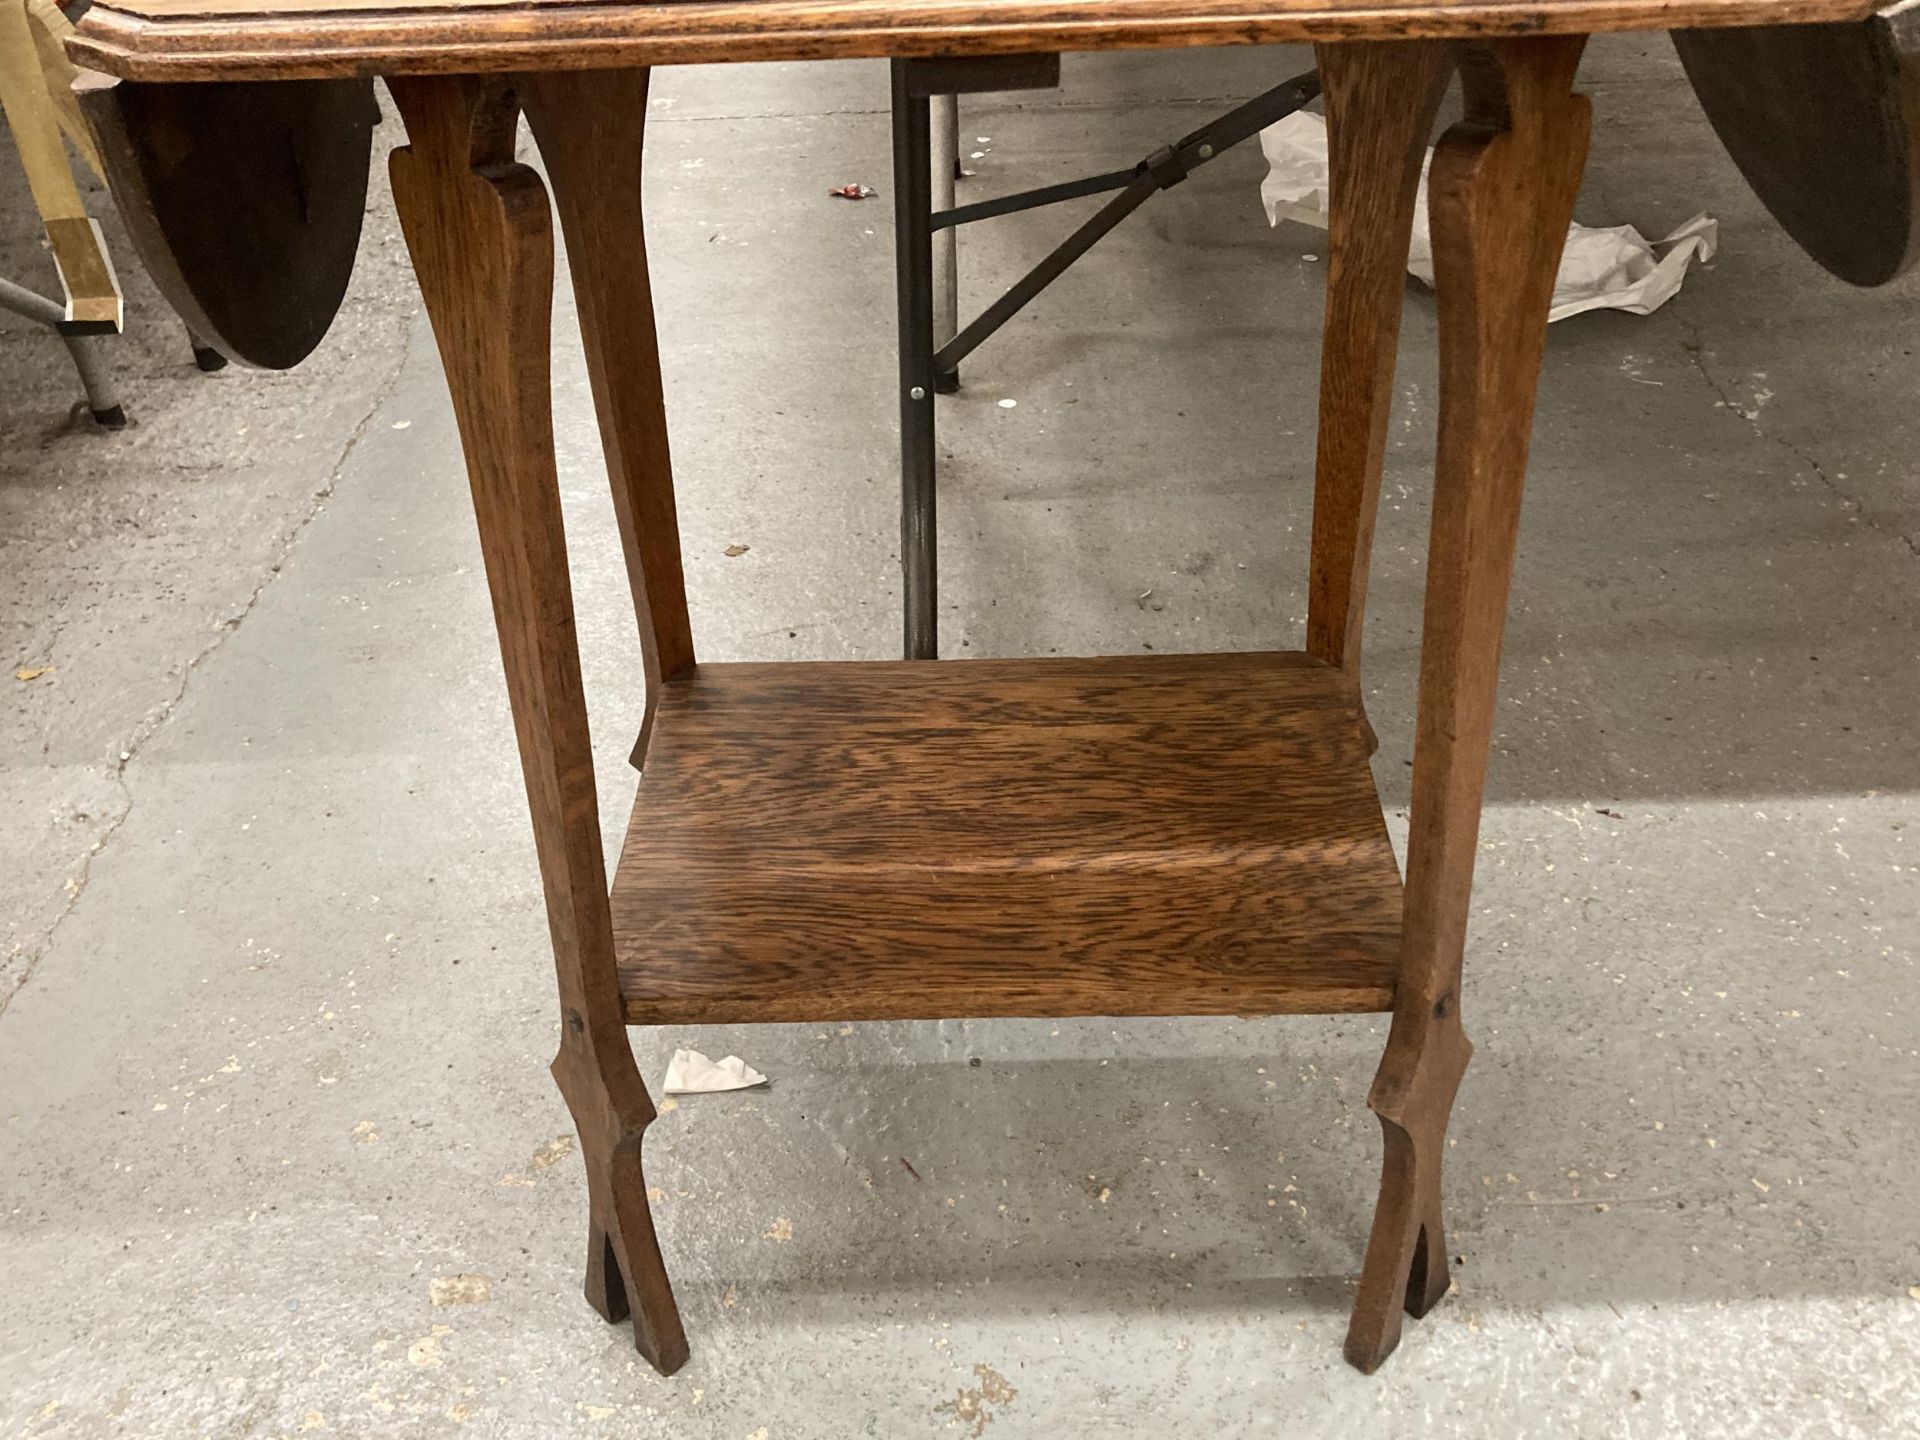 AN ARTS AND CRAFTS OAK SIDE TABLE - Image 3 of 3